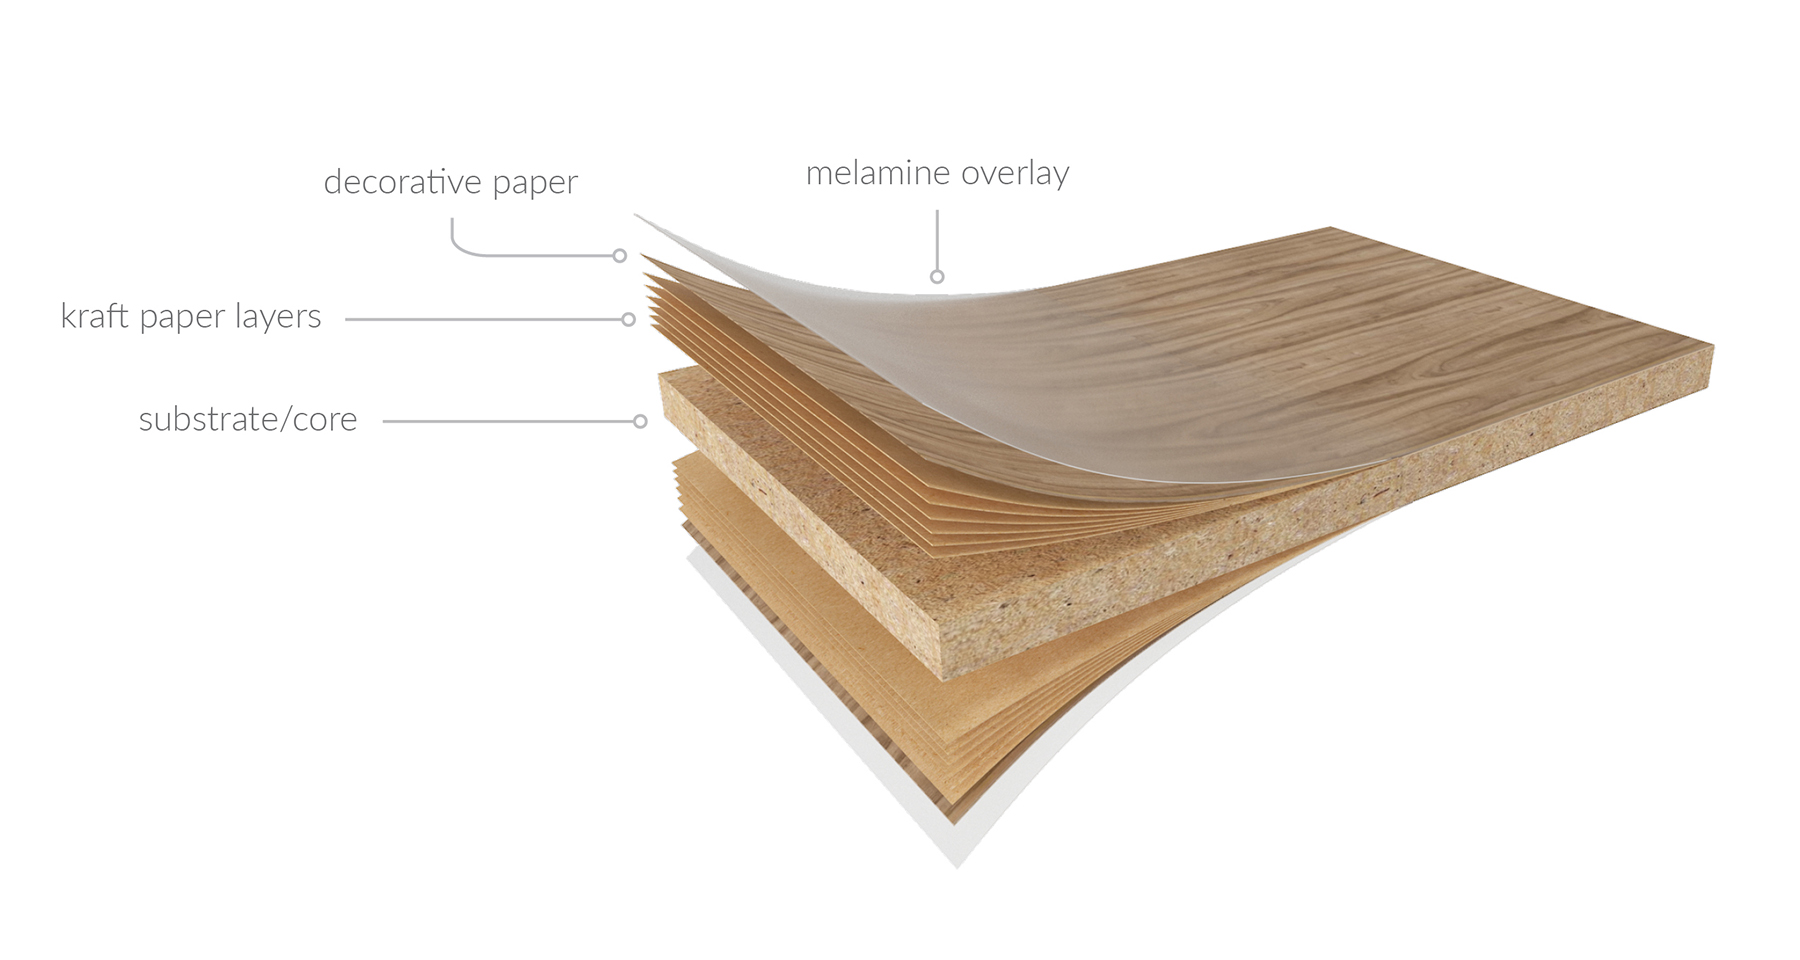 Types of Paper Explained: A Glossary of Paper and Substrate Terms